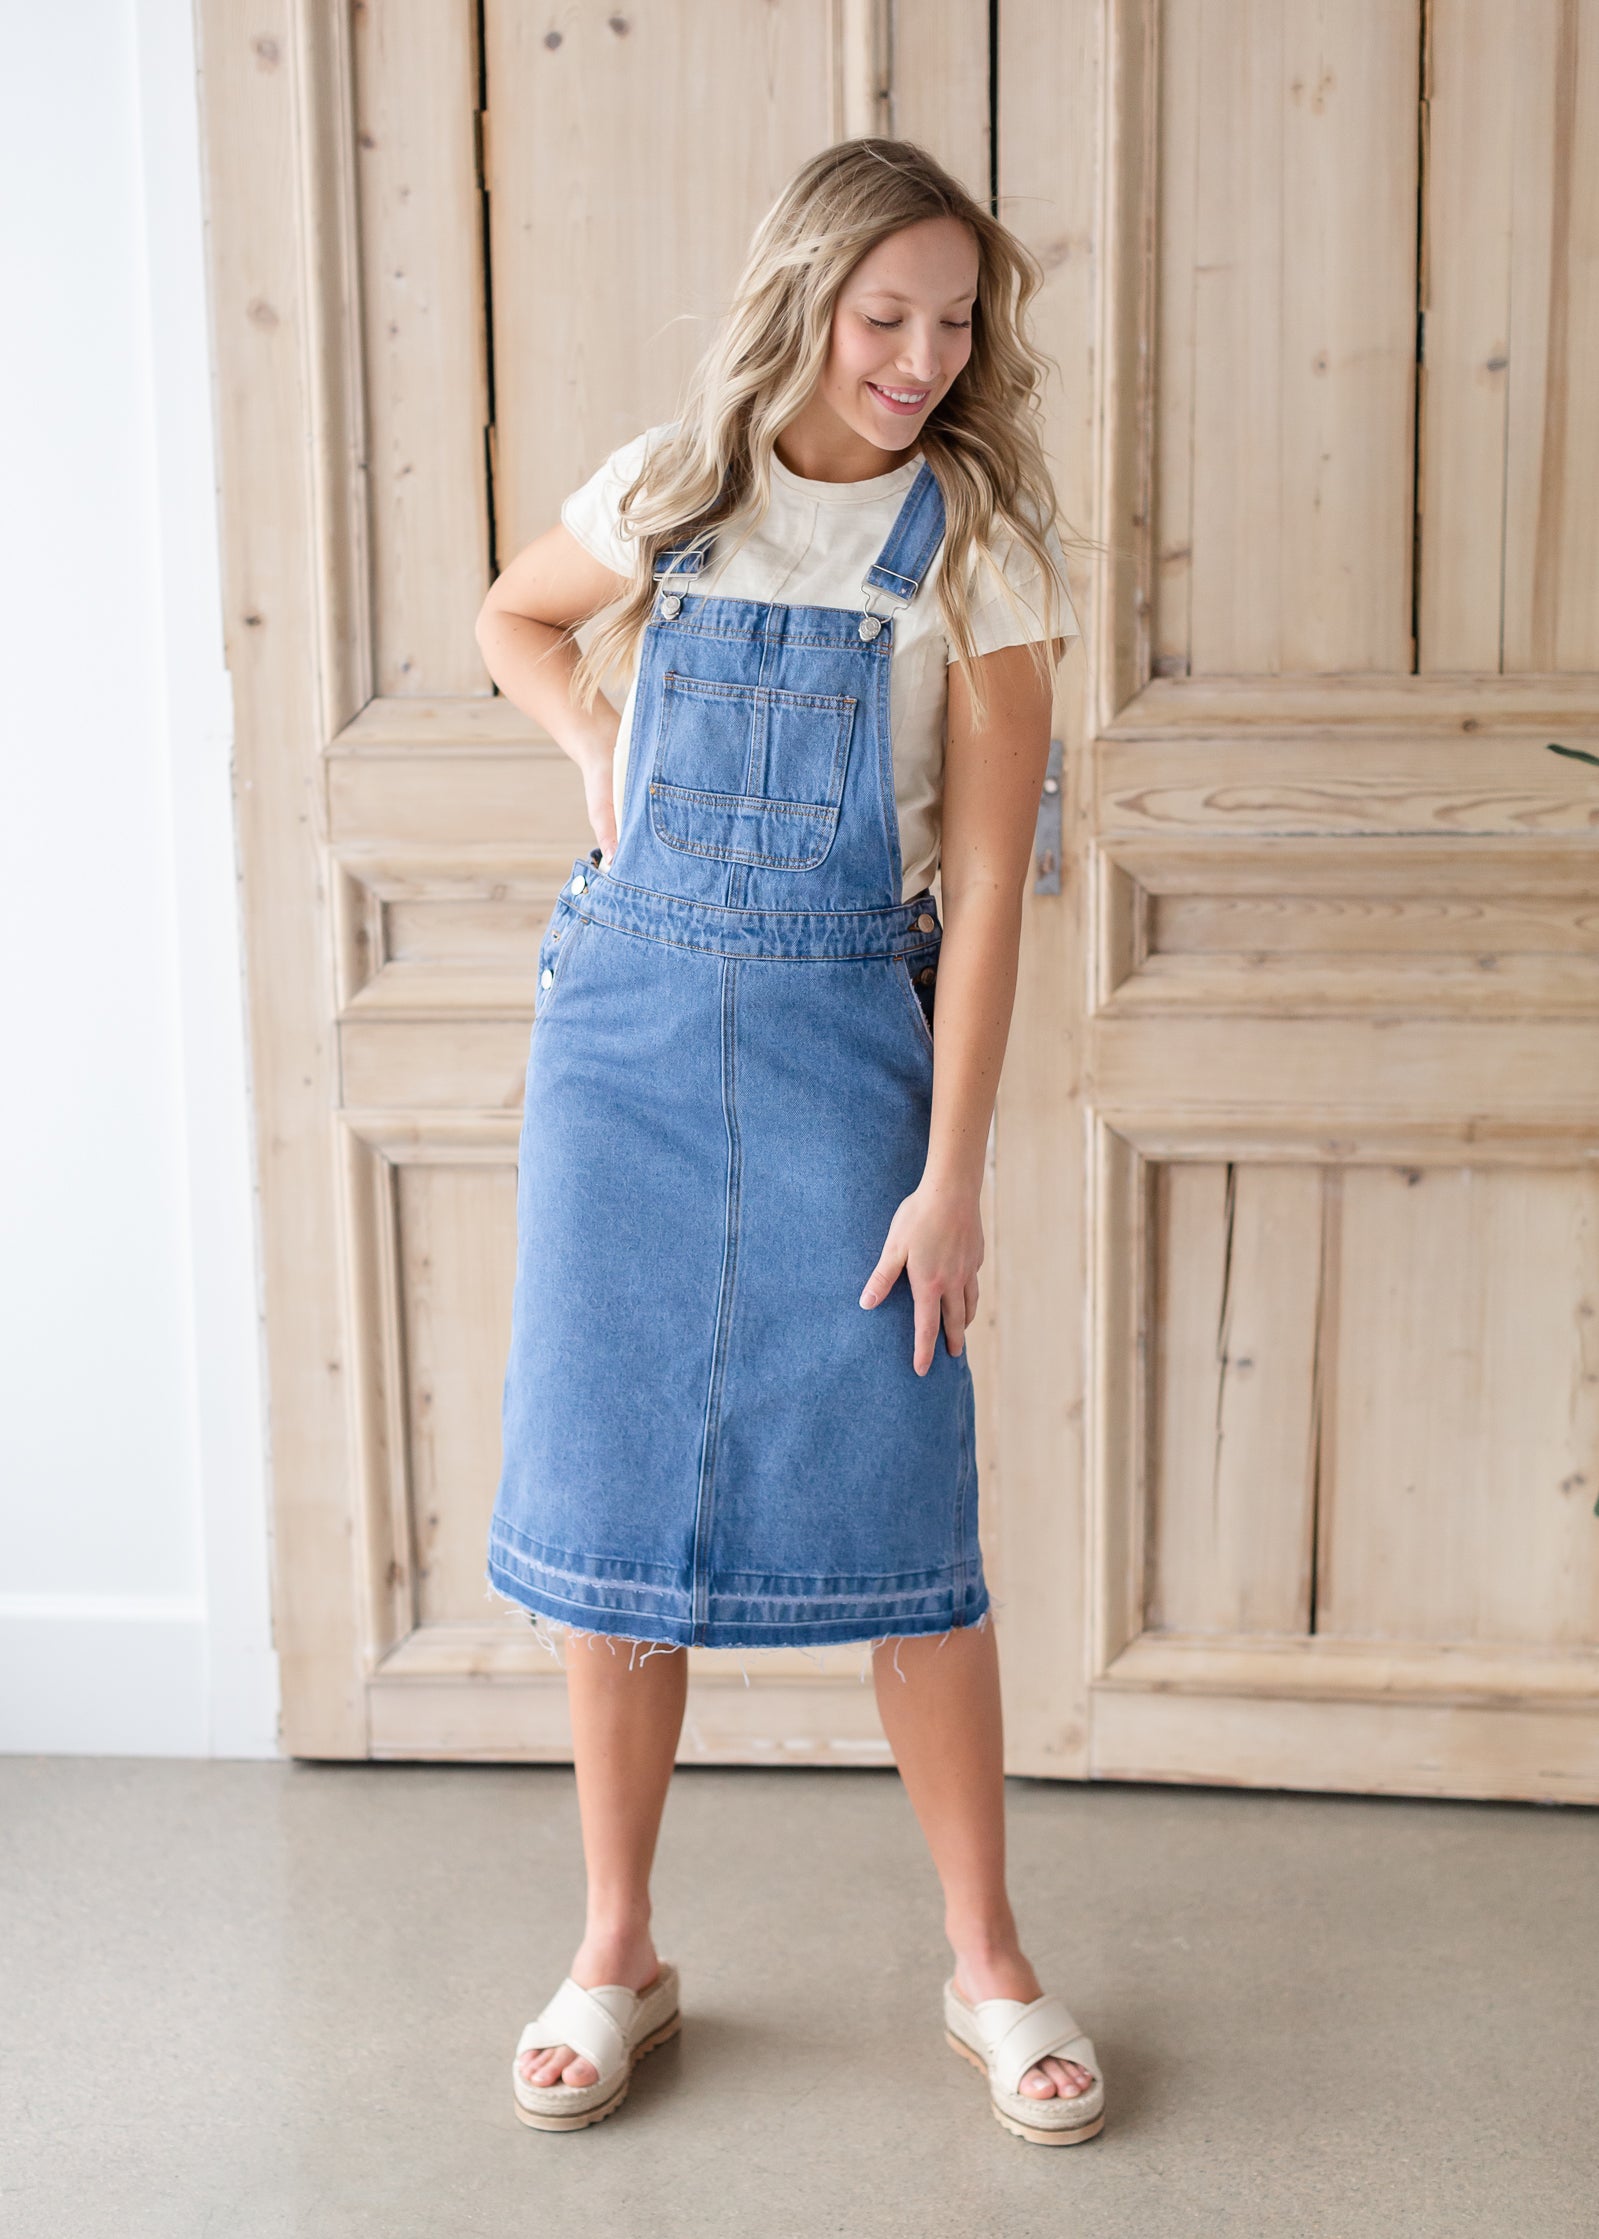 Buy Women Pinafore Dress Adjustable Straps Sleeveless Suspenders Tank Dress  with Pockets Loose Denim Overall Dress Dark Blue M at Amazon.in